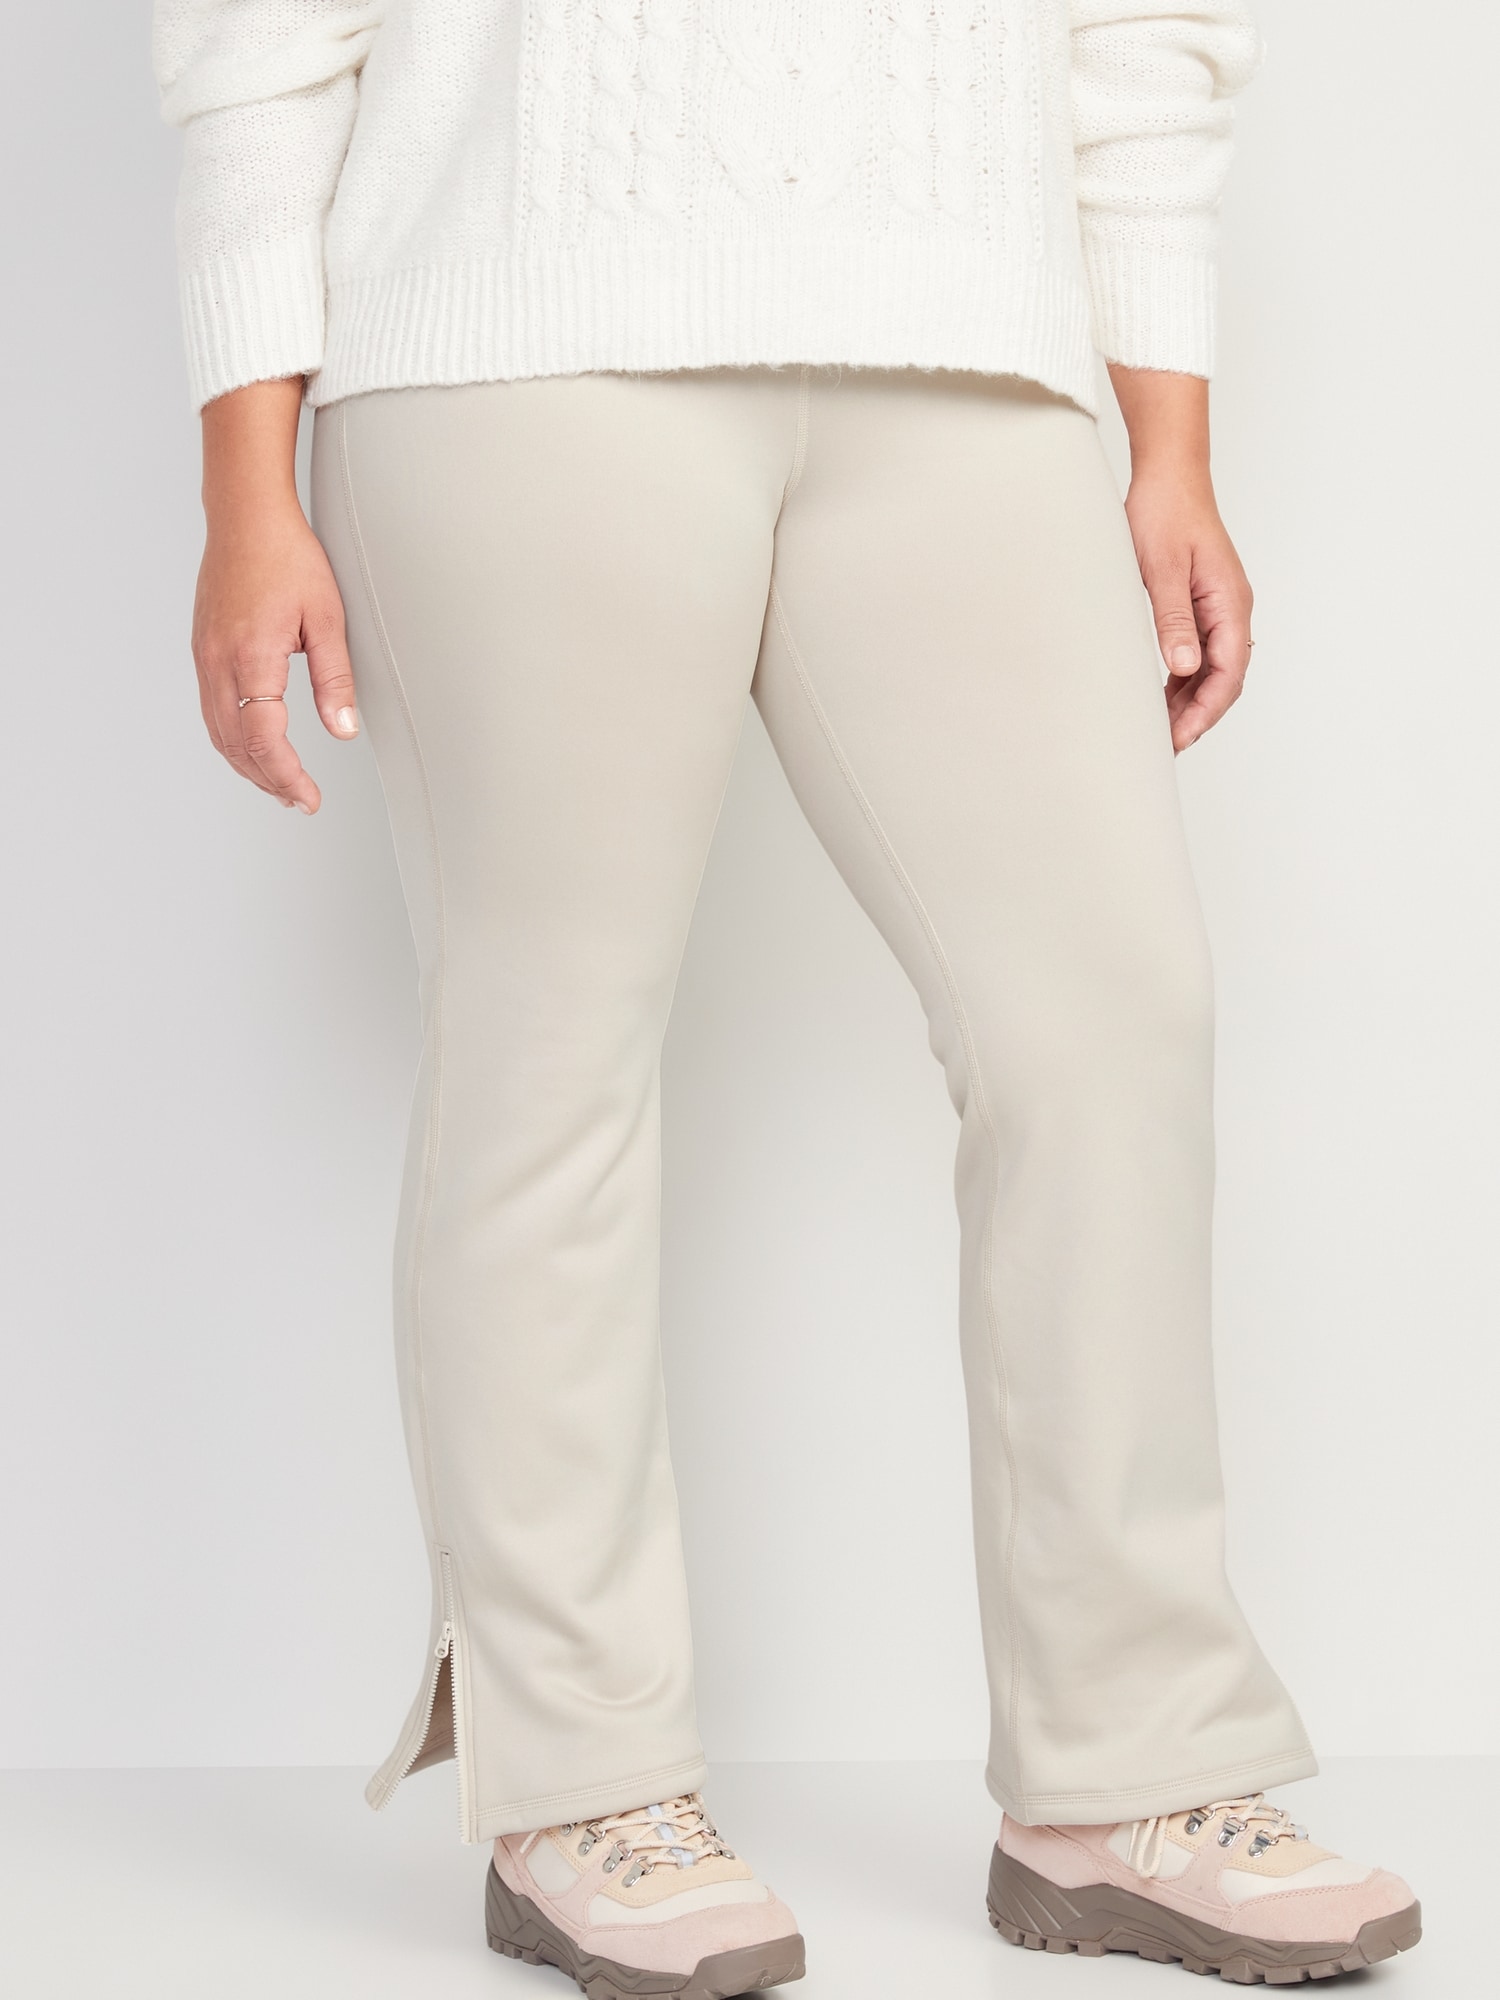 Old Navy High-Waisted UltraCoze Fleece-Lined Flare Leggings for